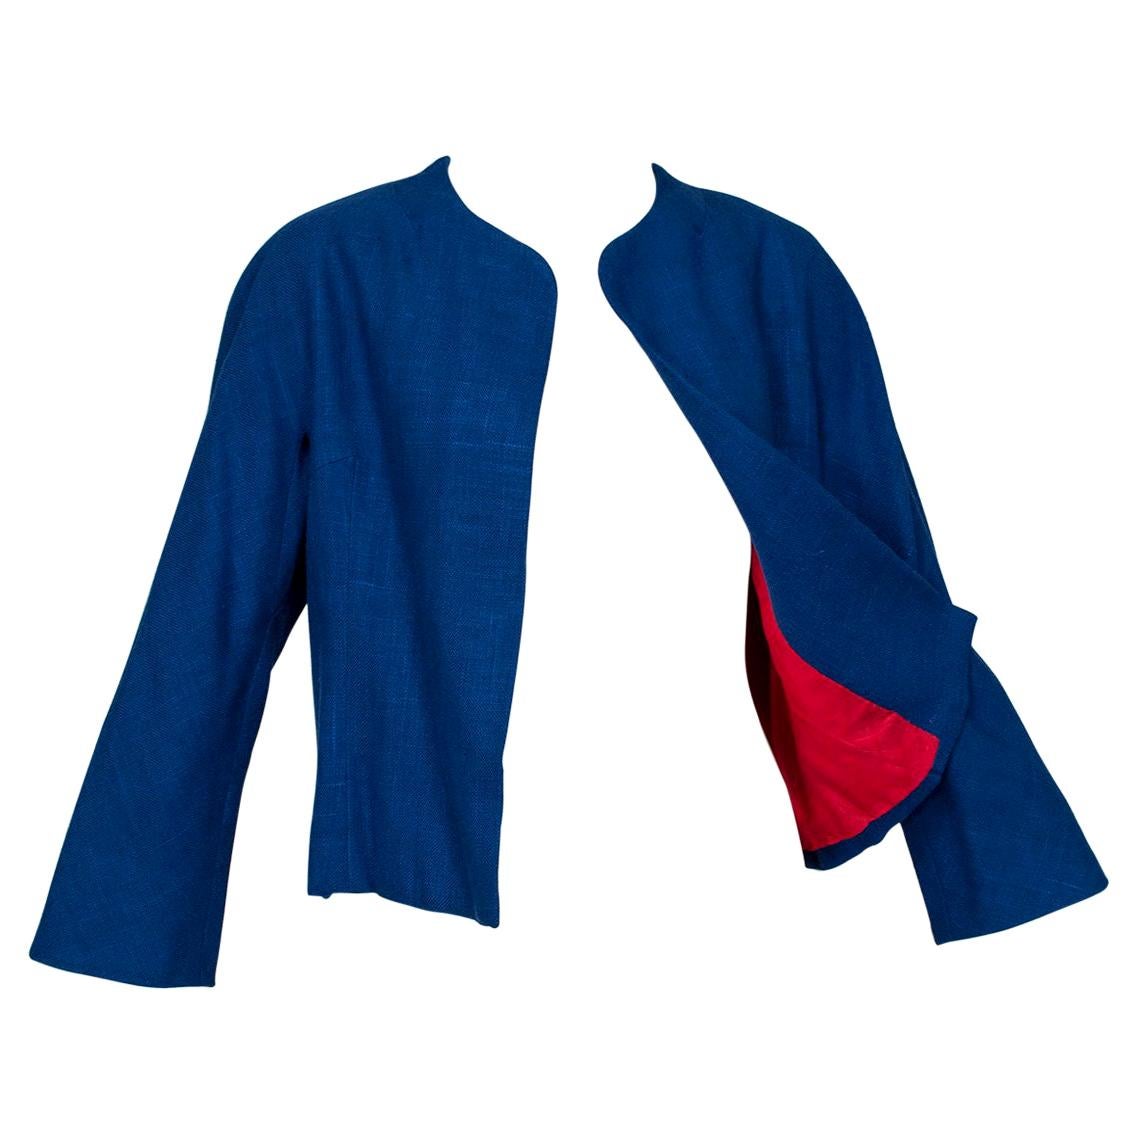 Pauline Trigère Marine Blue Collarless Crop Jacket with Red Lining - M, 1960s